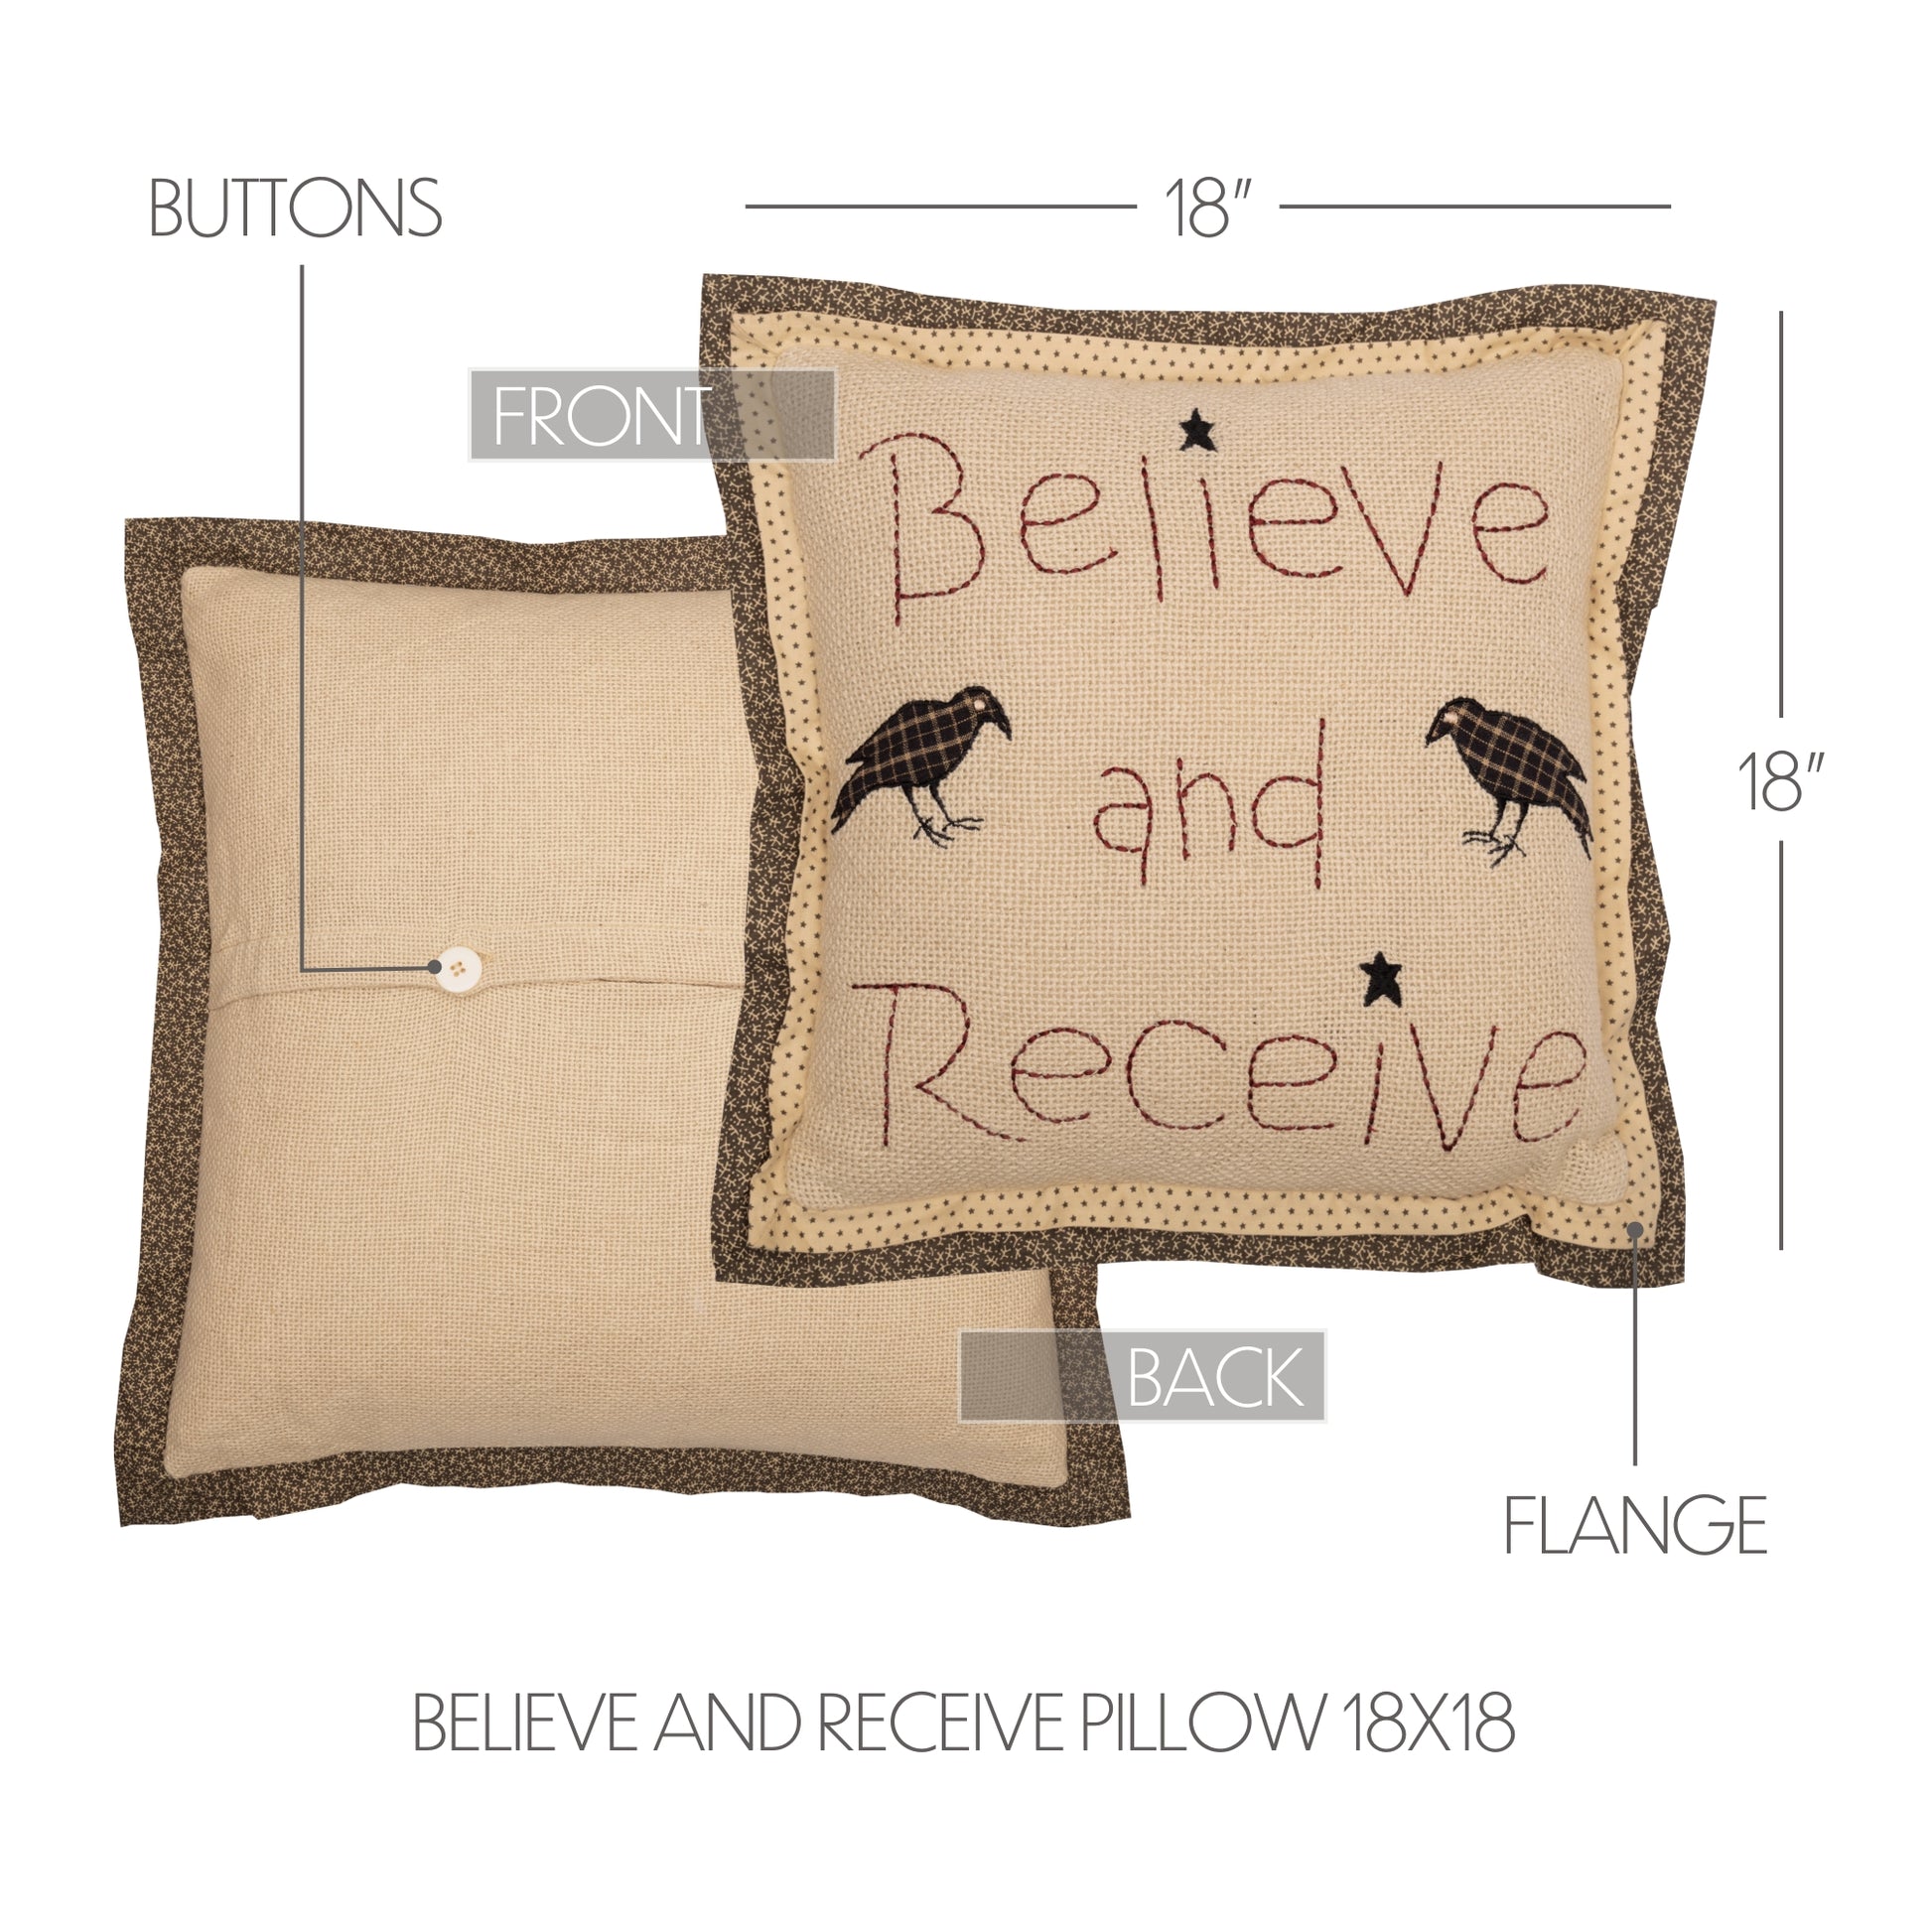 54617-Kettle-Grove-Believe-and-Receive-Pillow-18x18-image-1